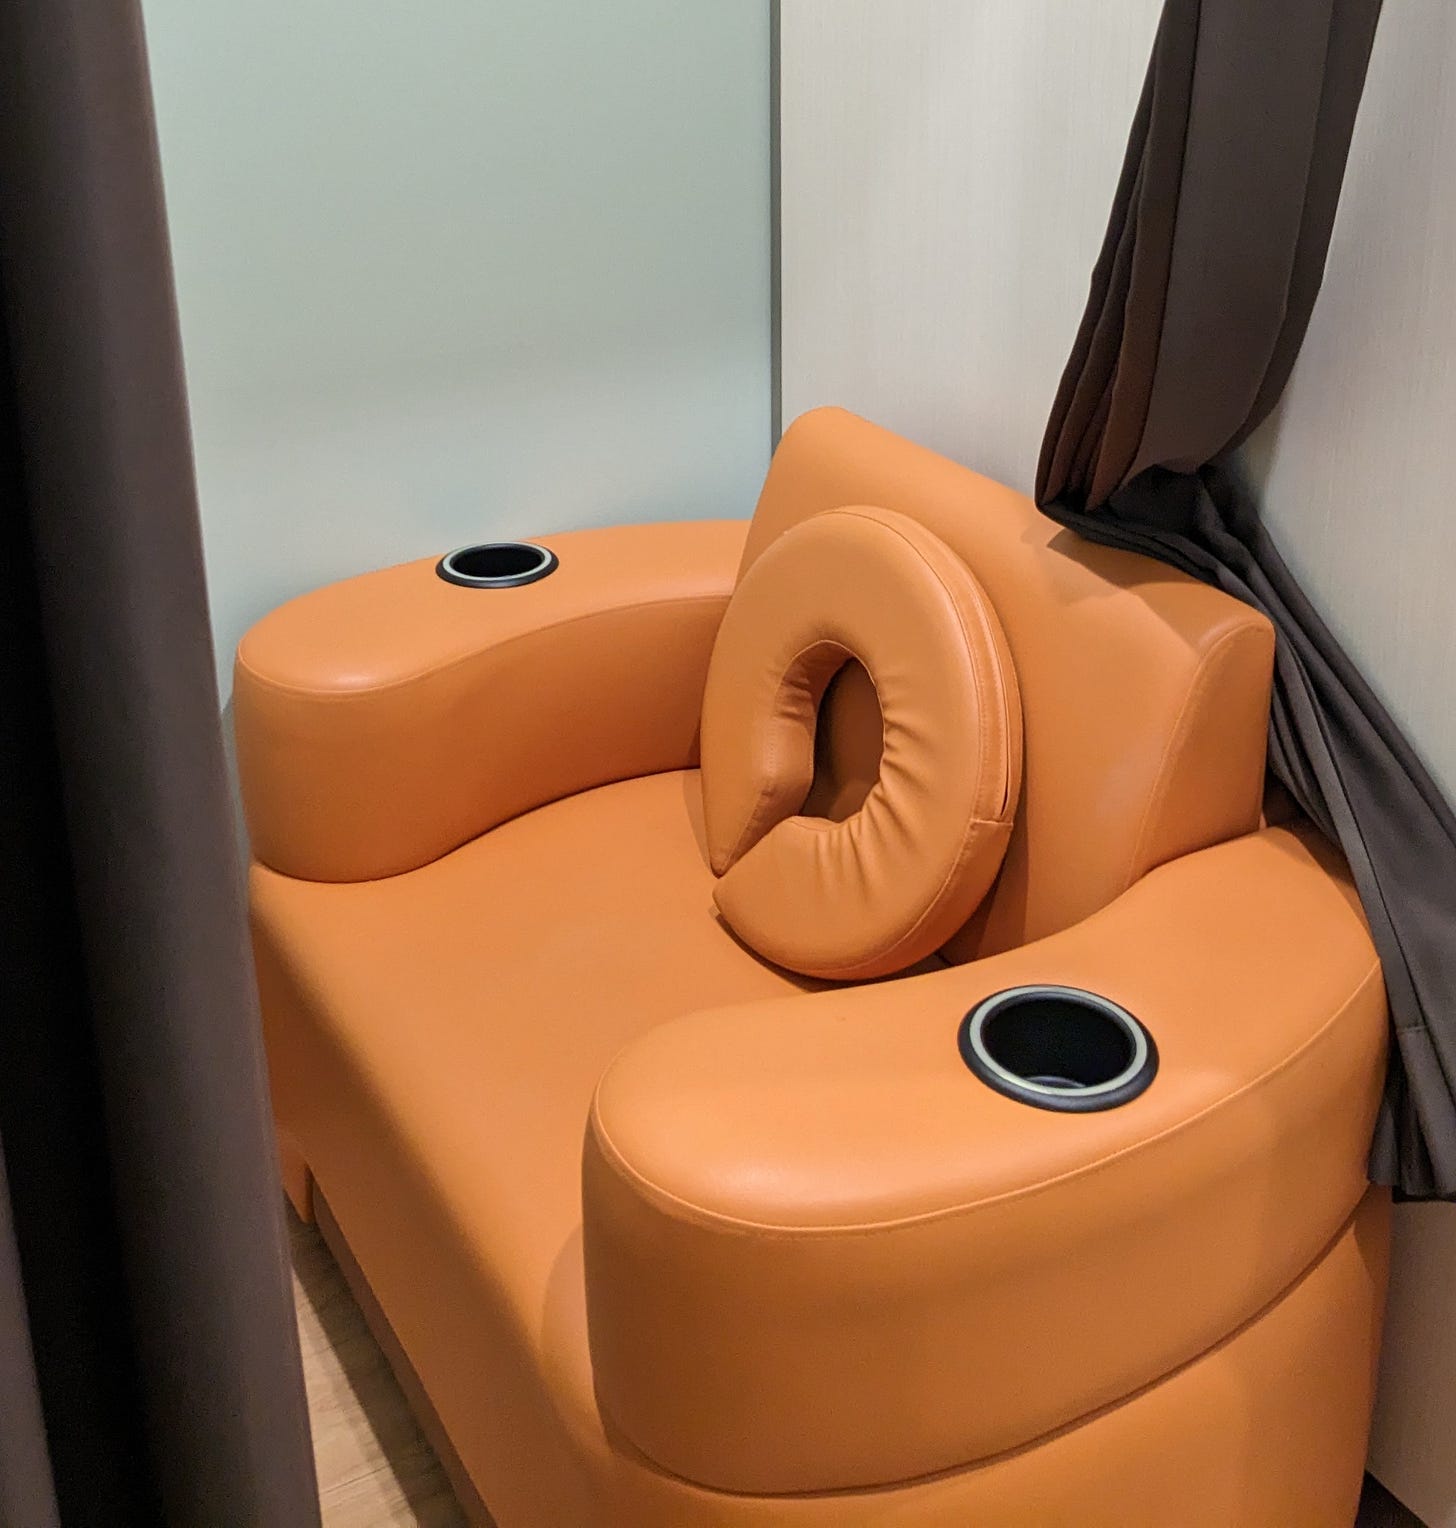 An wide, orange-colored leather seat with comfortable, wide arm berths and a doughnut pillow, with curtains surrounding the space -- able to be fully enclosed